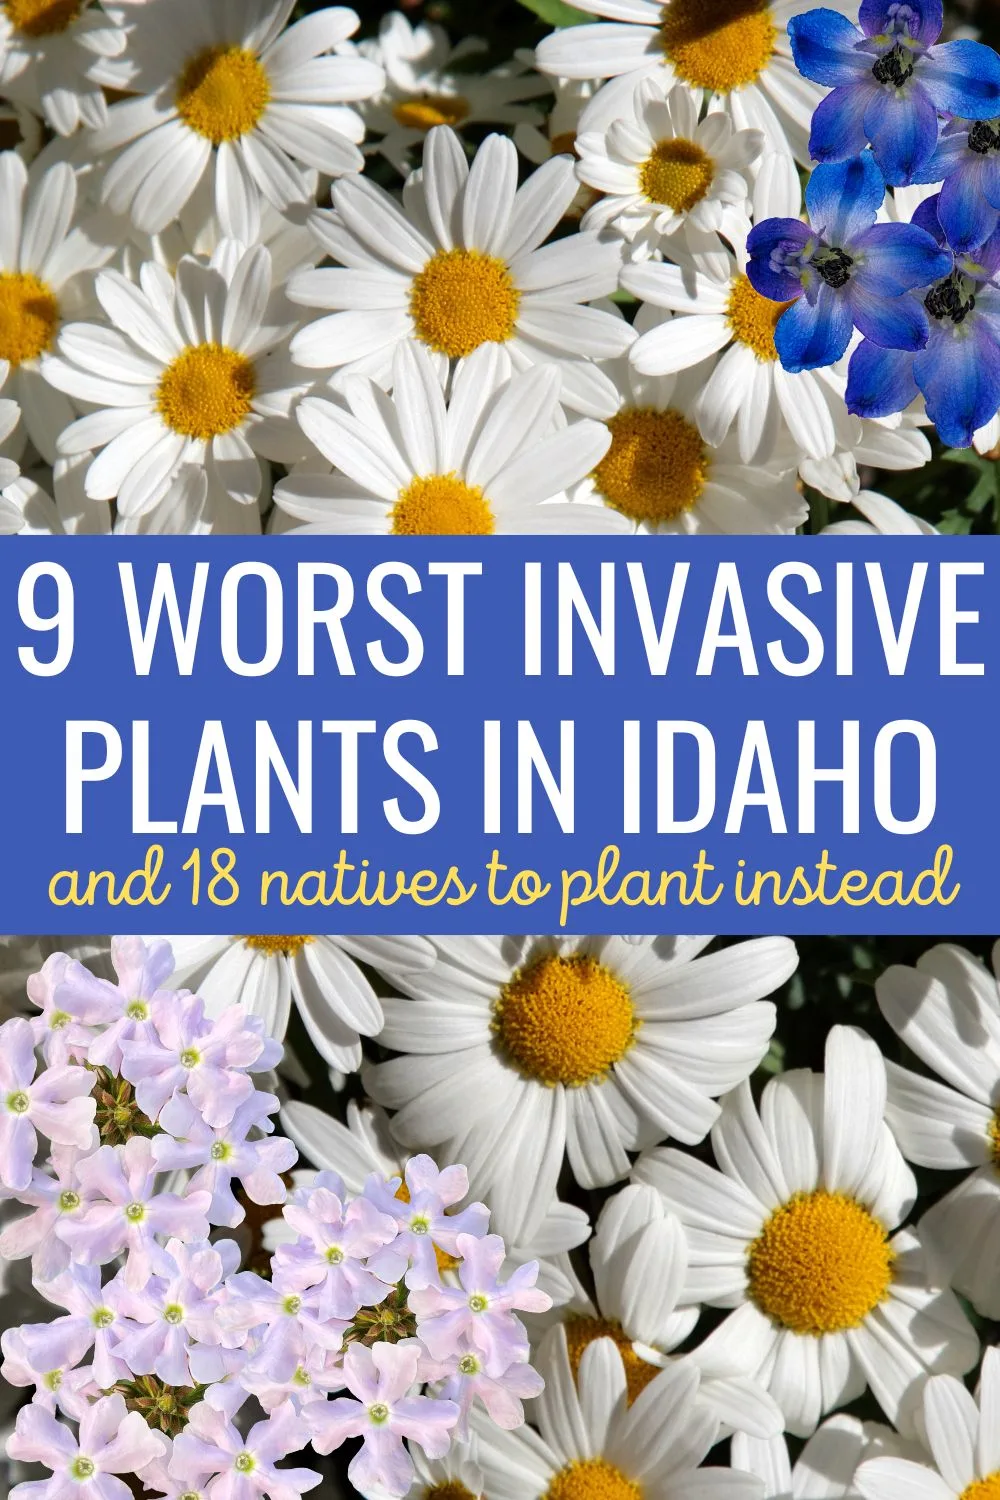 9 worst invasive plants in Idaho- and 18 natives to plant instead